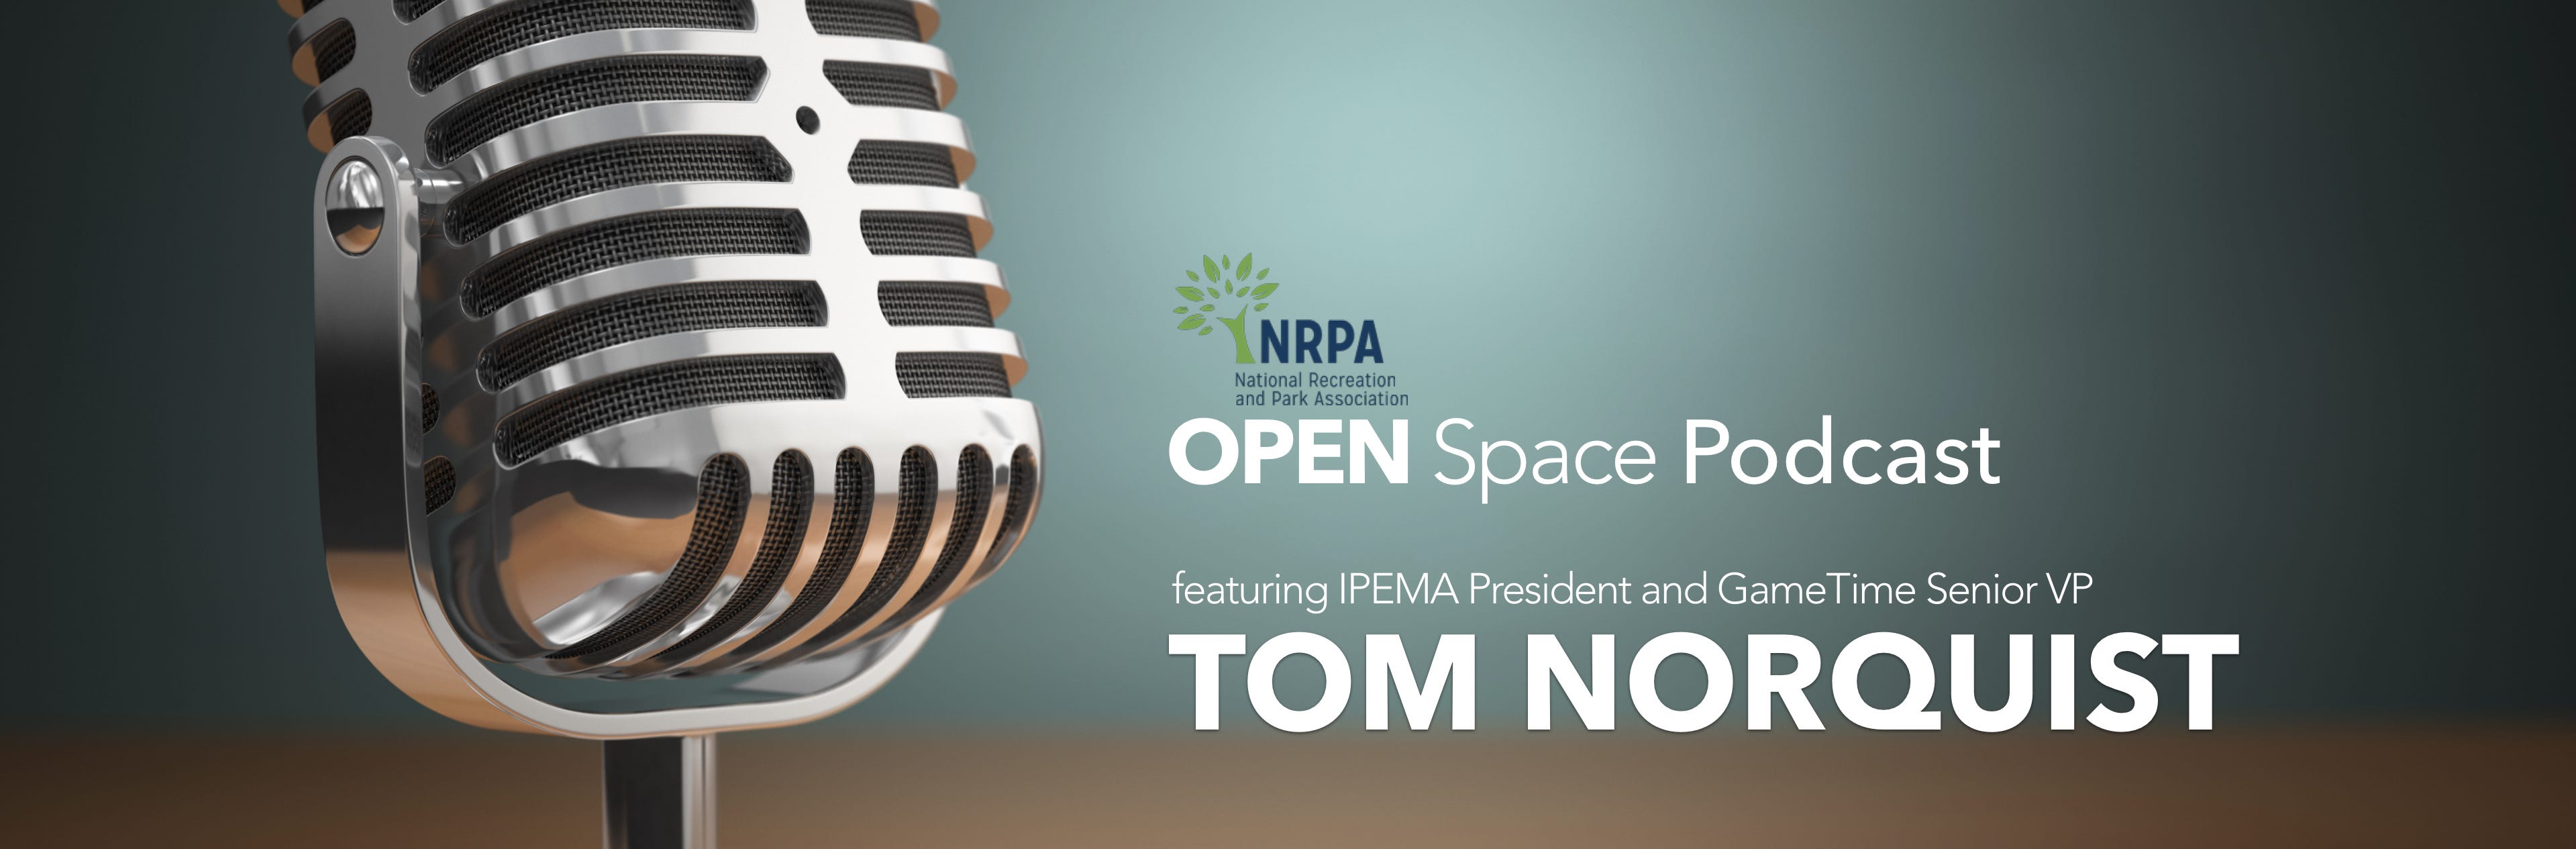 GameTime's Tom Norquist Interviewed on NRPA Open Space Podcast